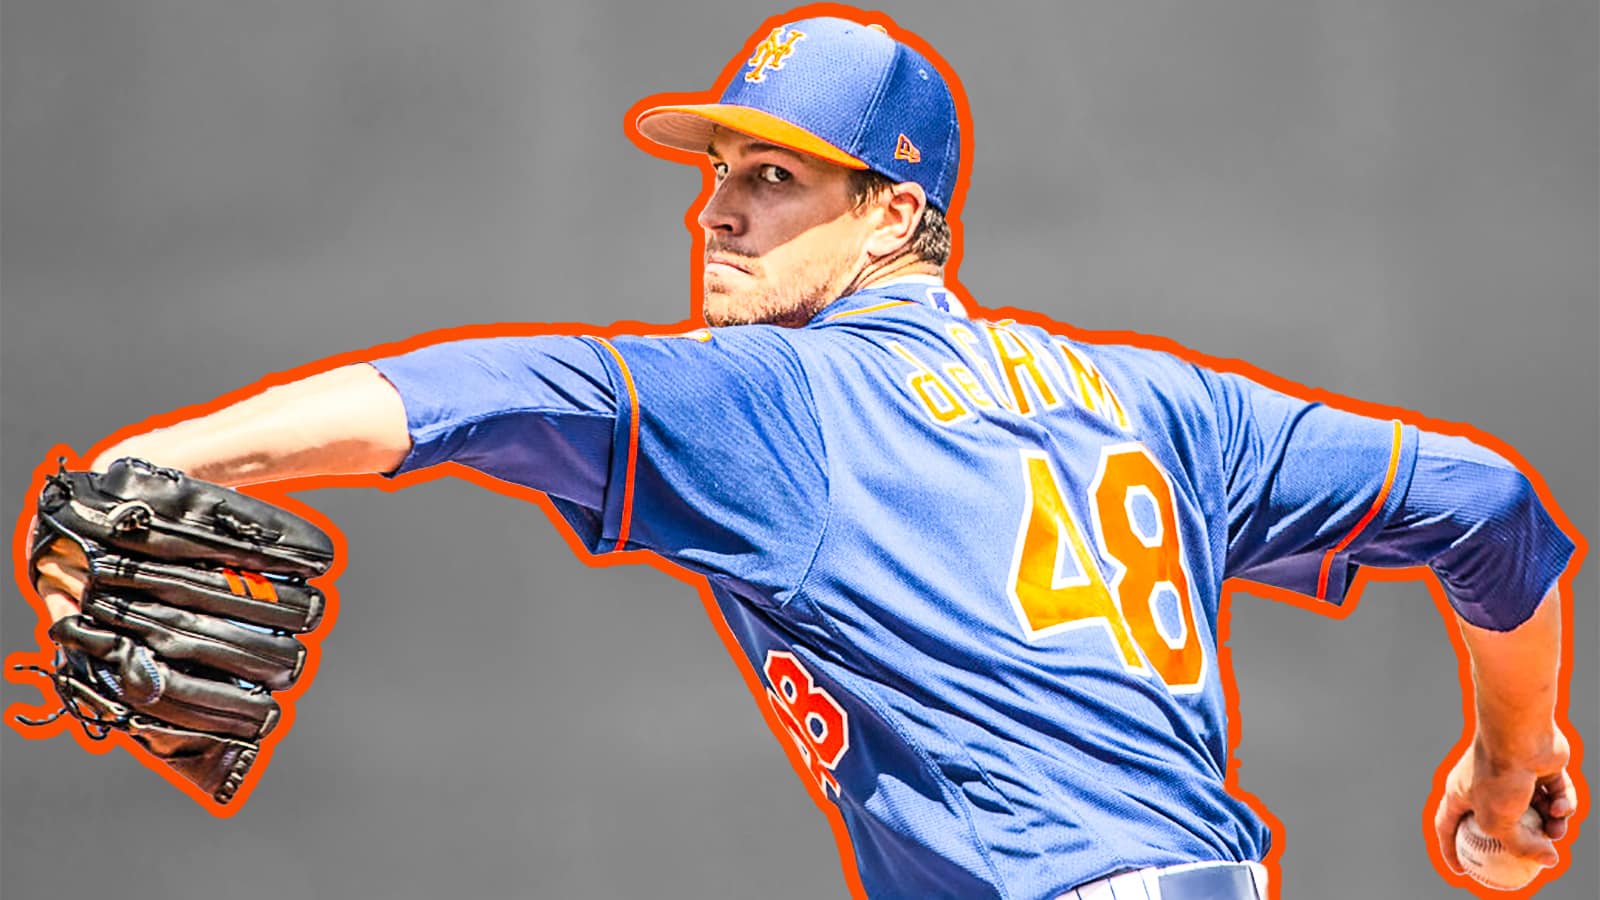 New York Mets video: Jacob deGrom features 97 m.p.h. fastball in debut